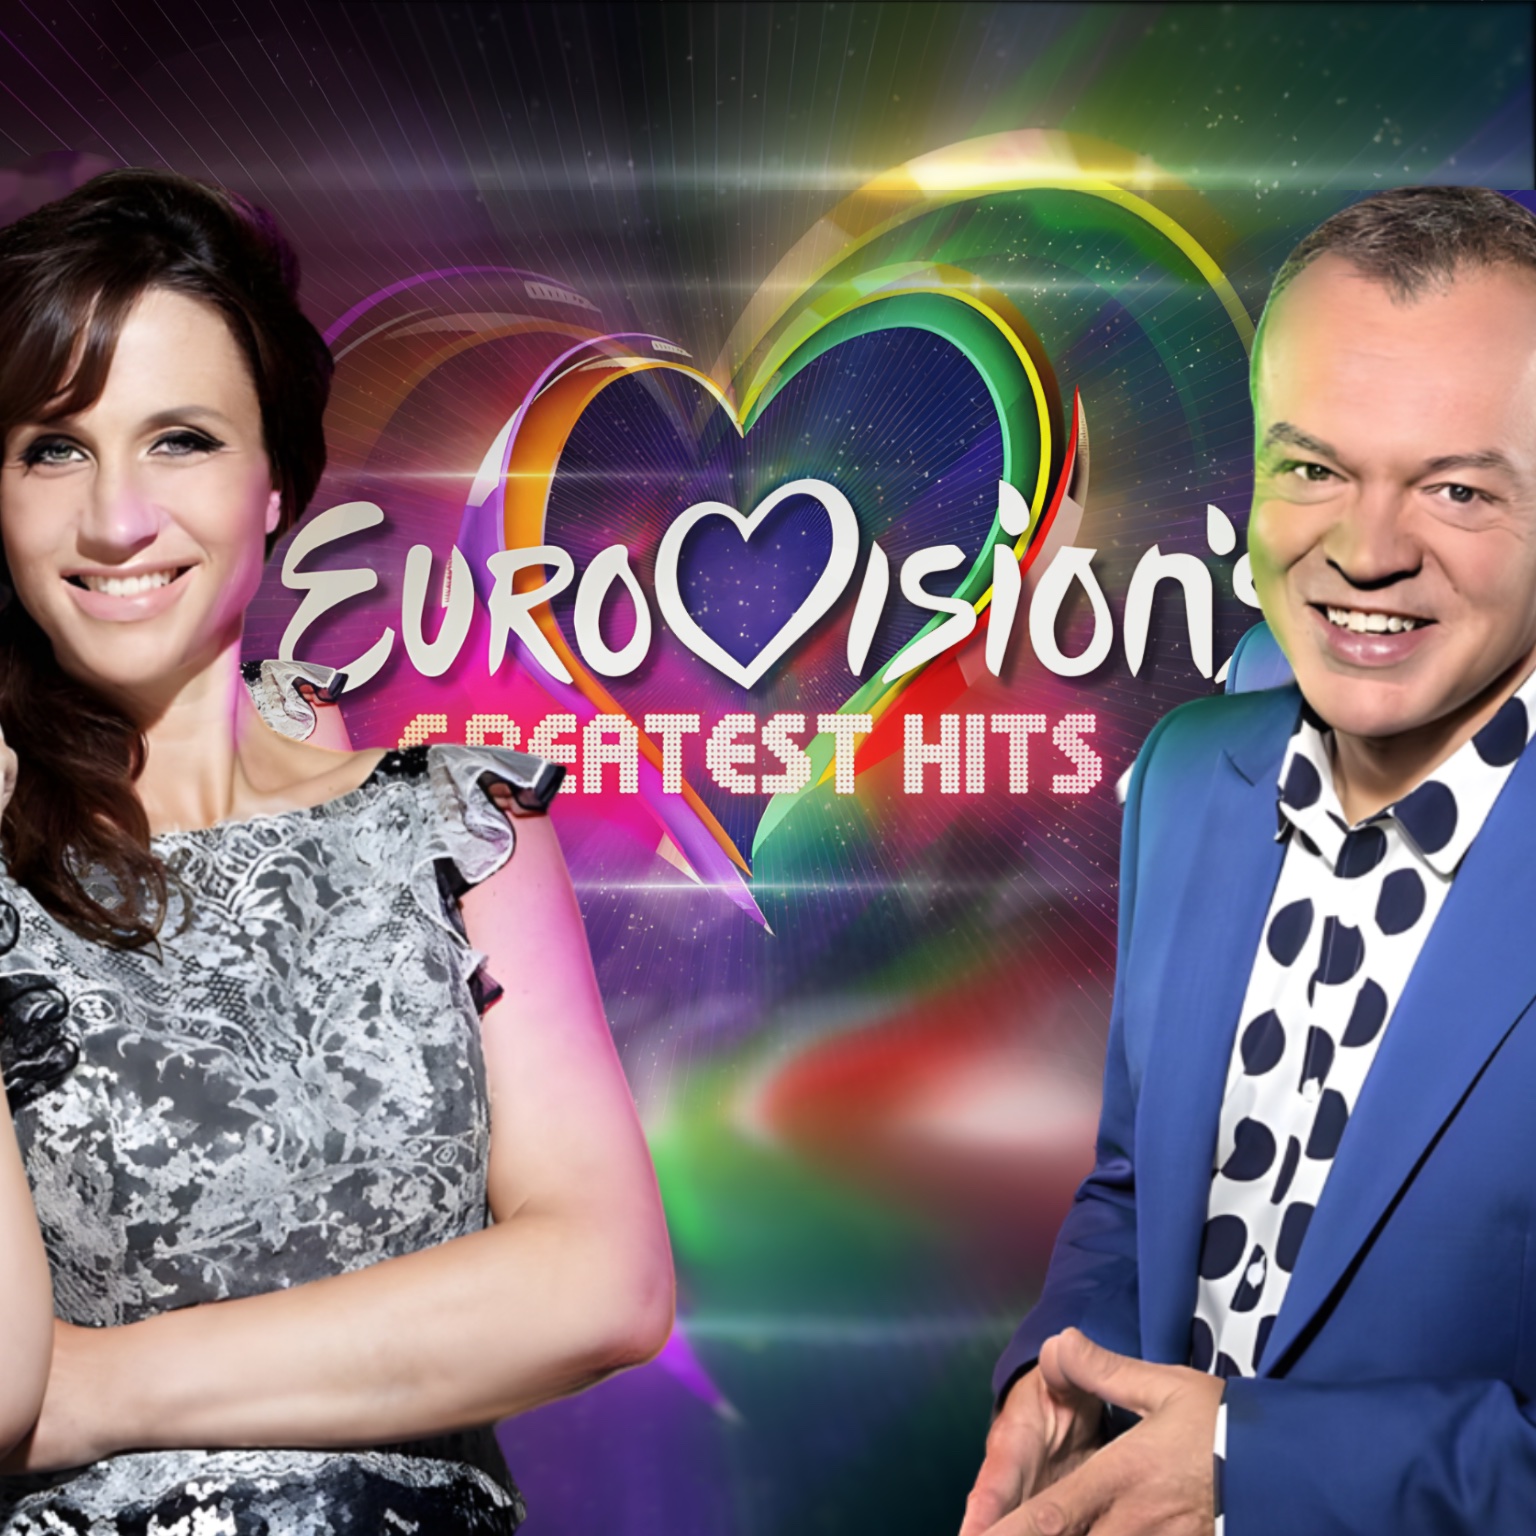 EUROVISION'S 60TH GREATEST HITS